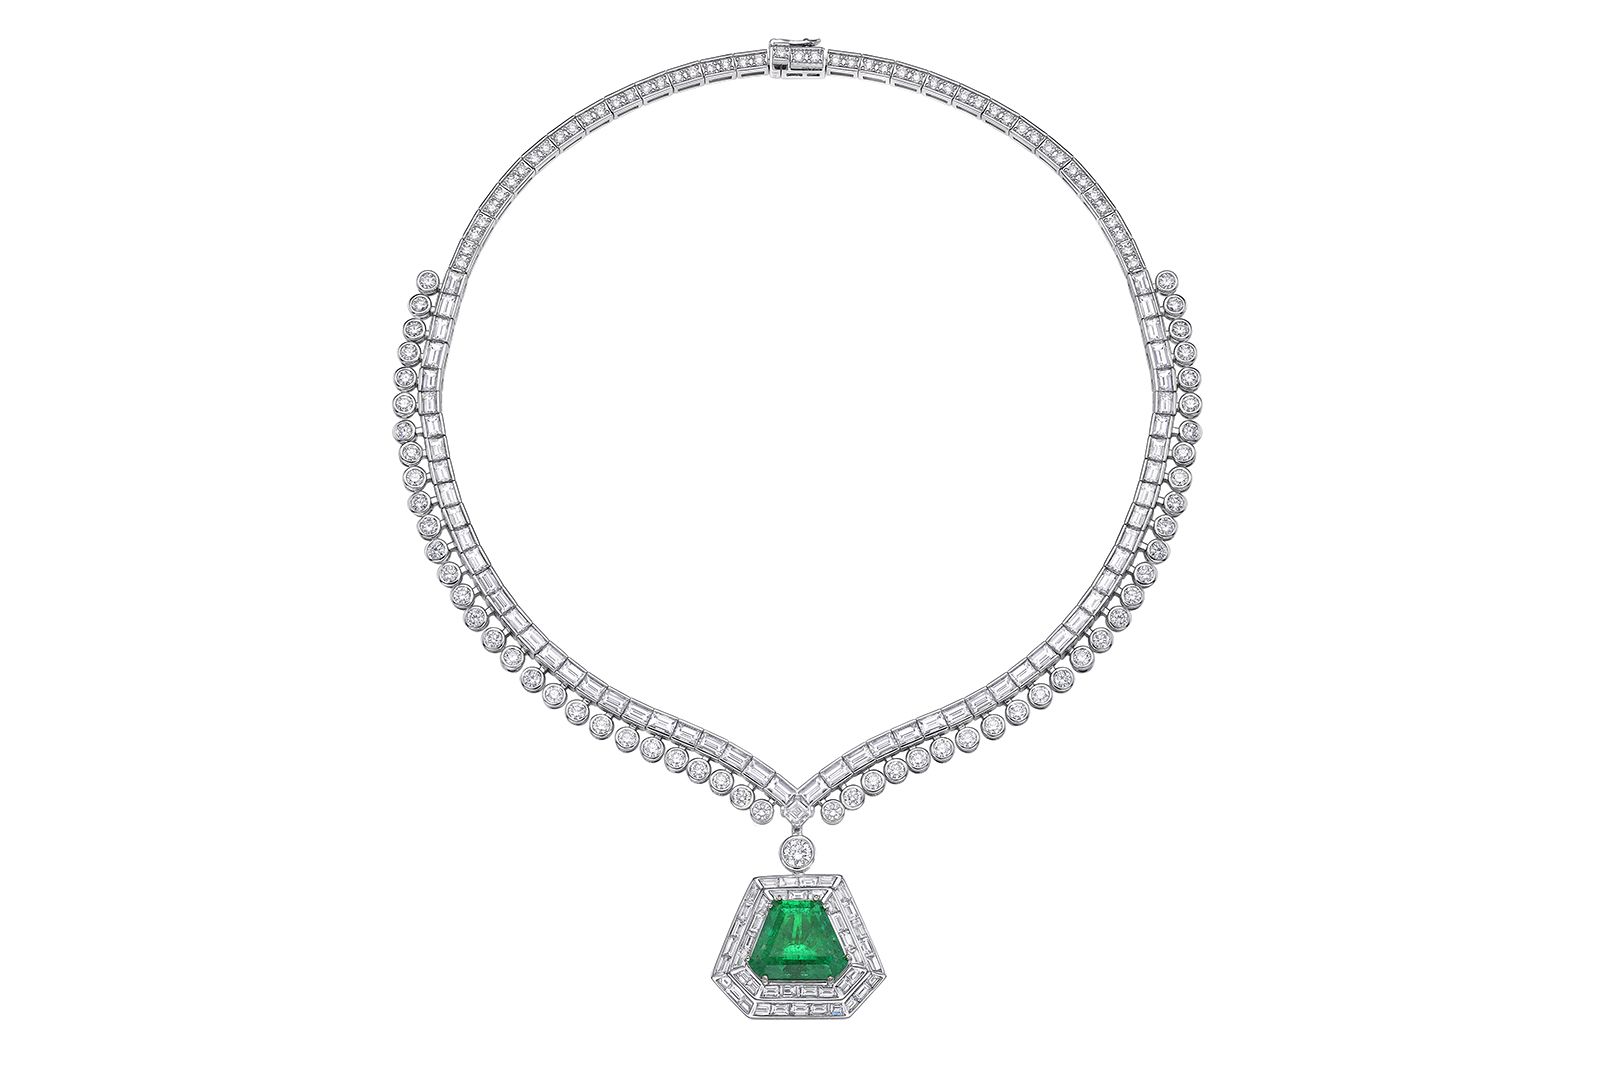 Sunita Nahata Crown necklace with a 9.42 carat Colombian emerald and diamonds in 18k white and yellow gold, from the Art Deco Emerald collection 